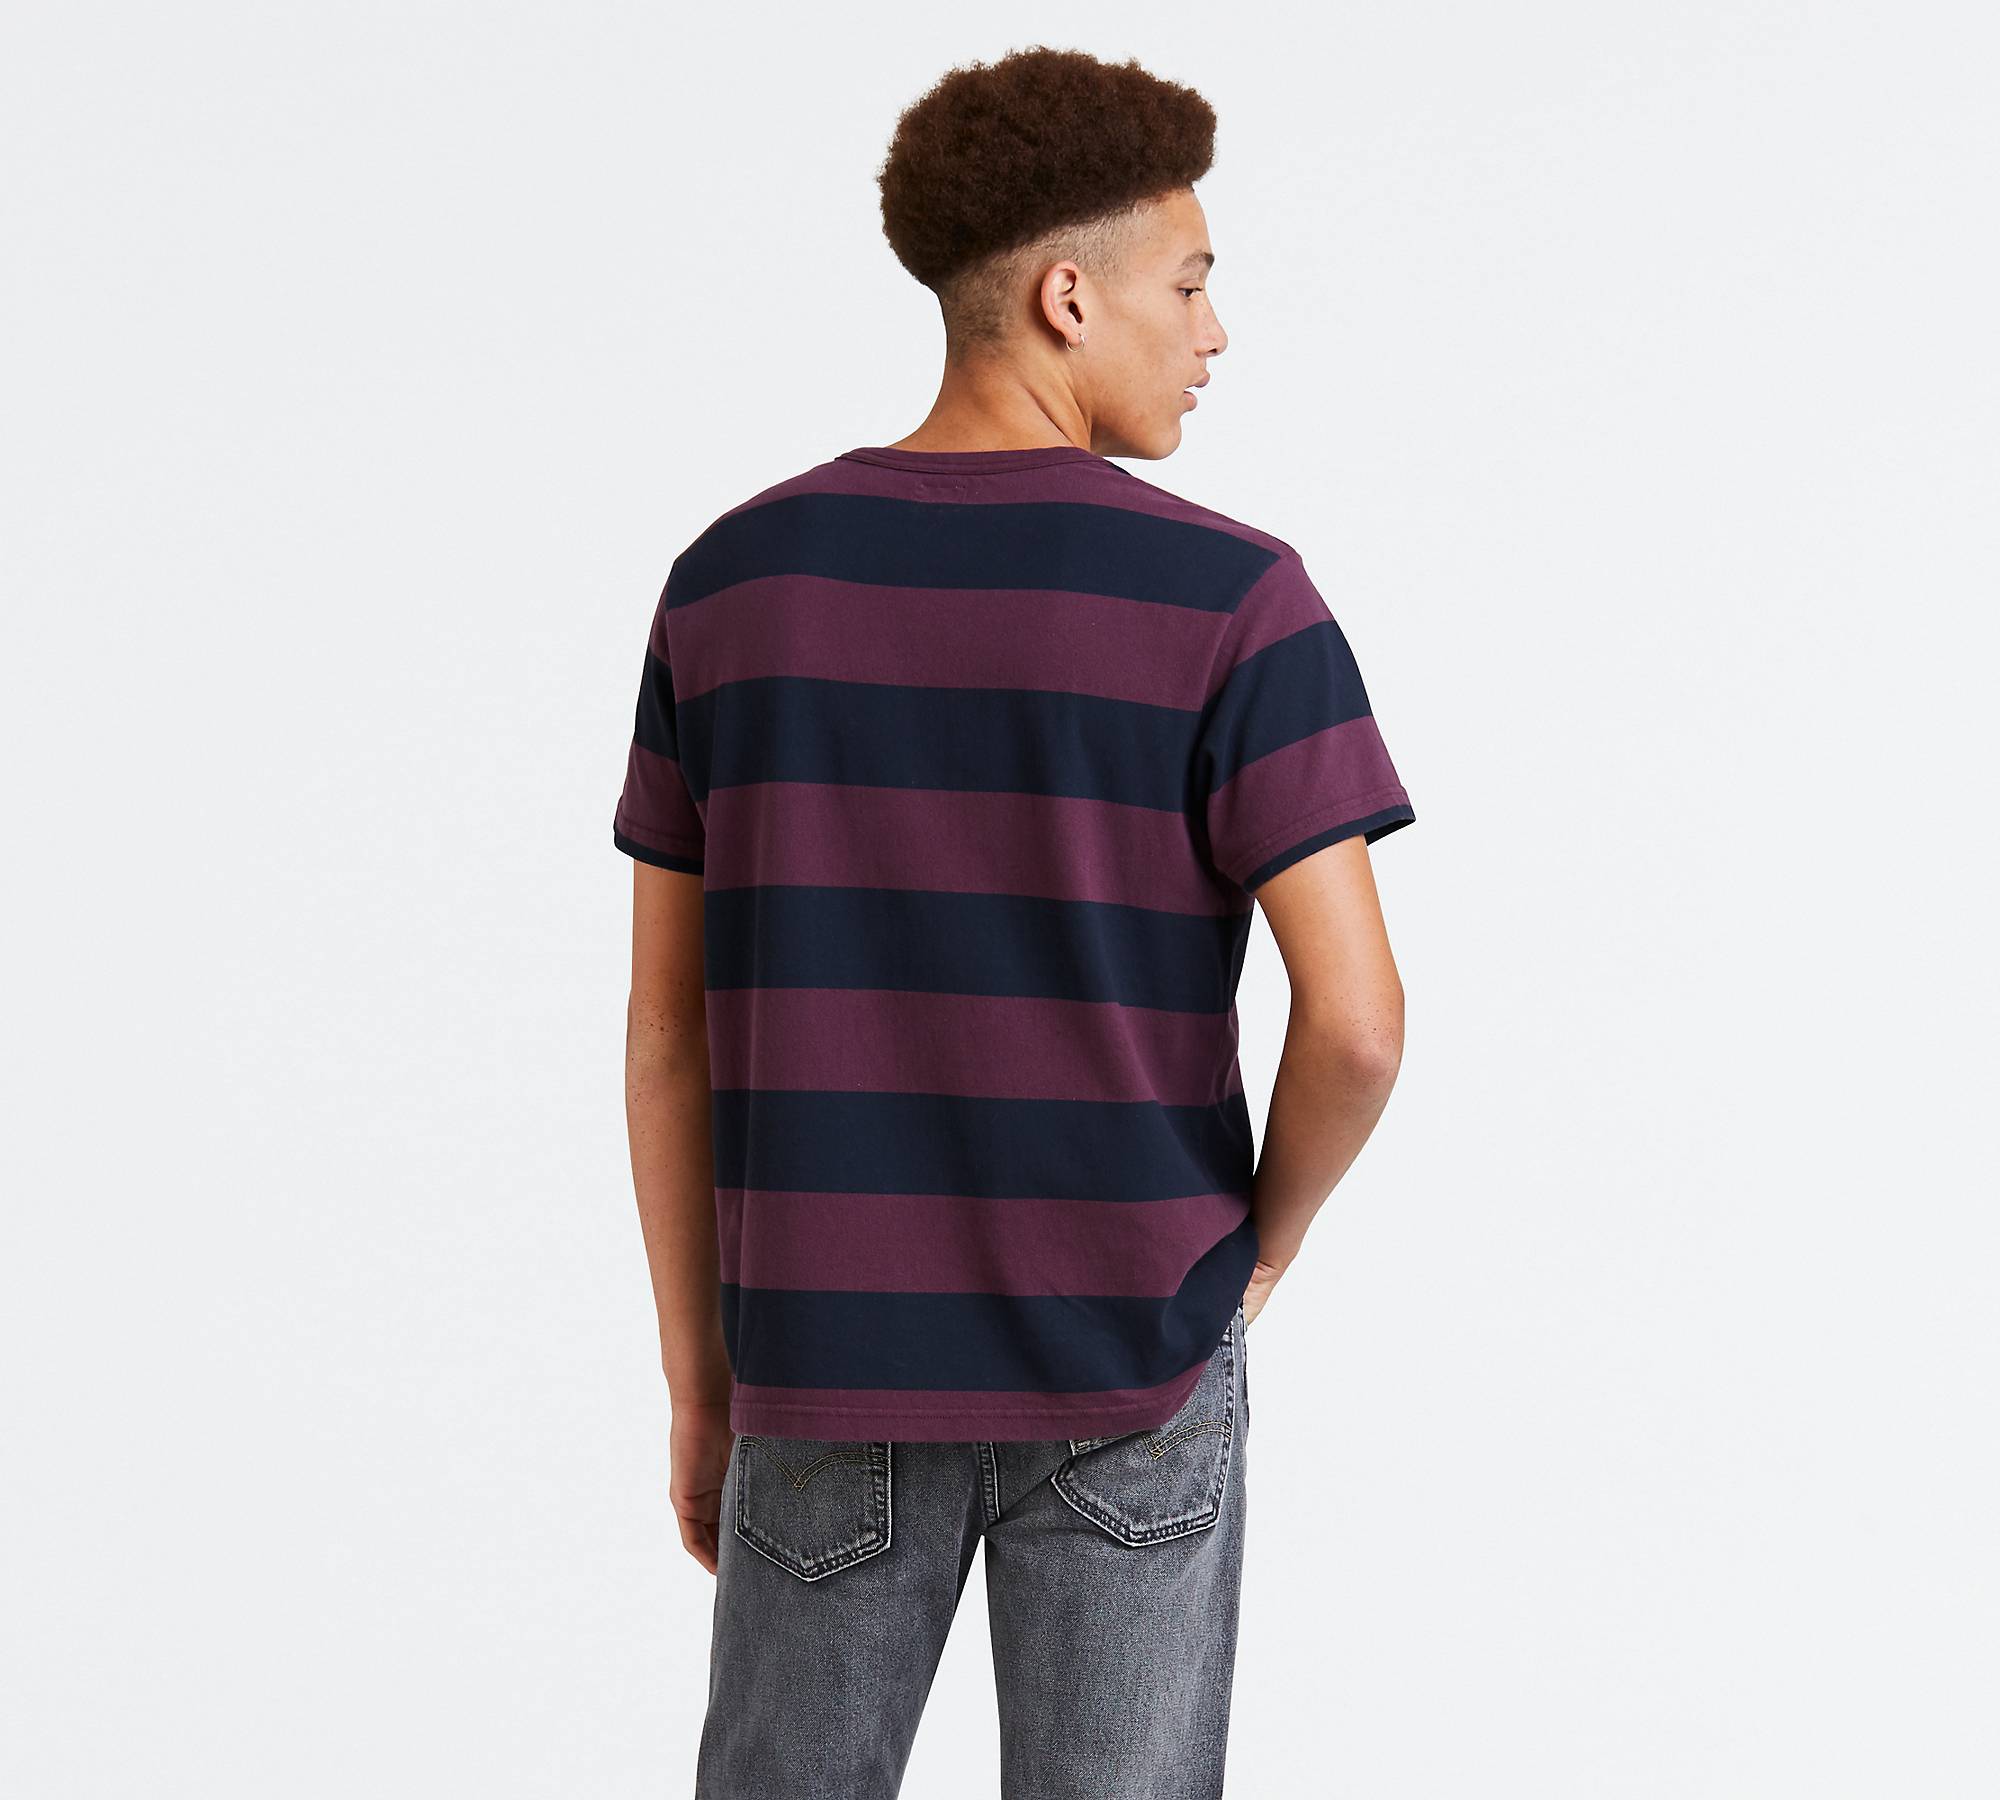 Mighty Made™ Tee Shirt - Blue | Levi's® US